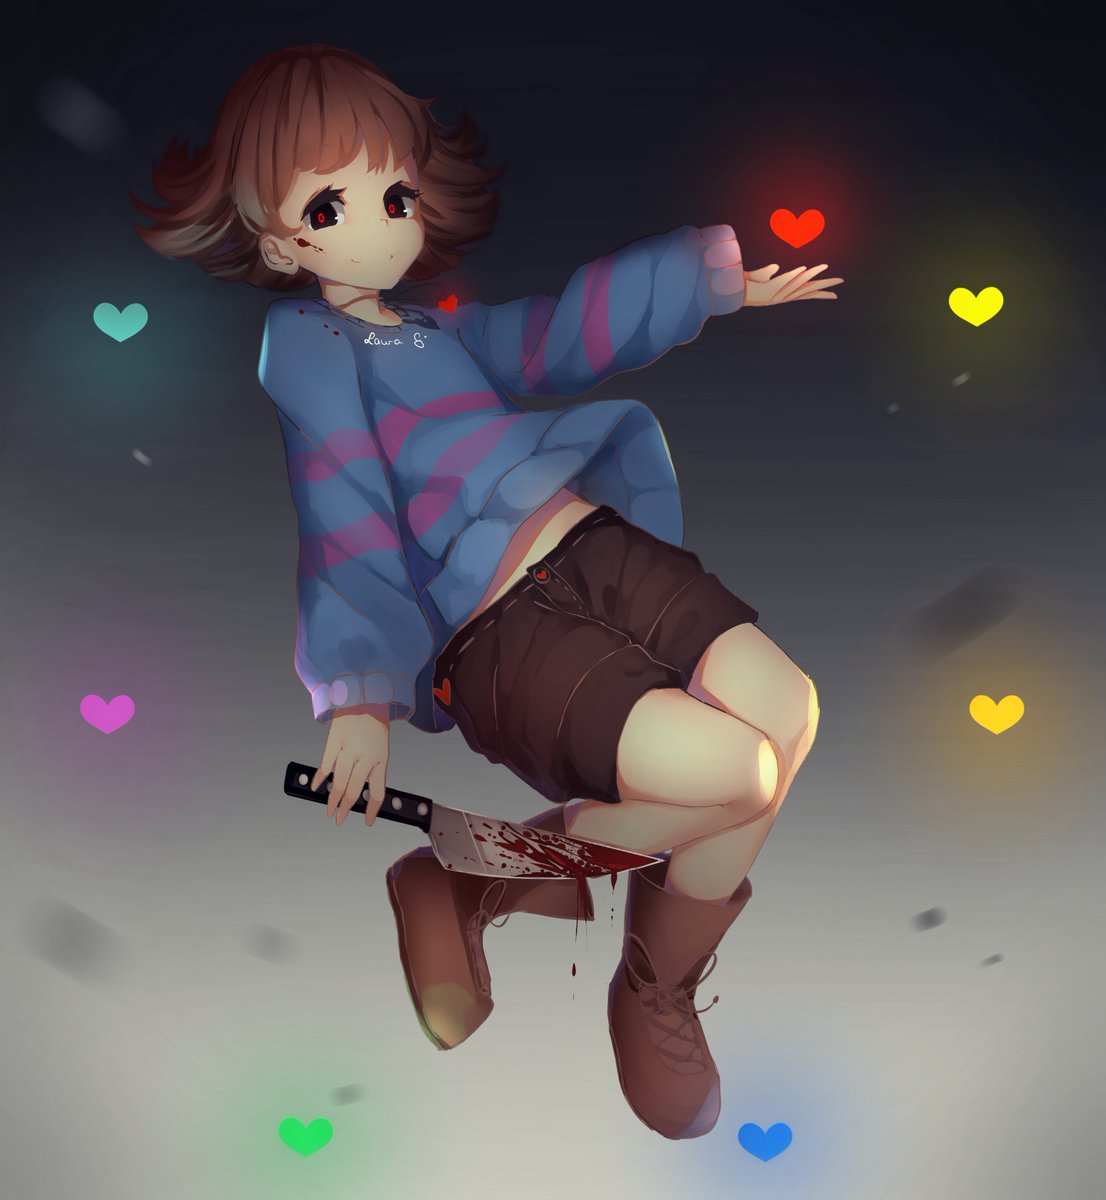 Sasoura Oh Look I Managed To Draw Something Edgy Xd Frisk Genocide Souls Undertale Fanart Evil T Co Agg2bdzyhv T Co Uc1zthsxzl